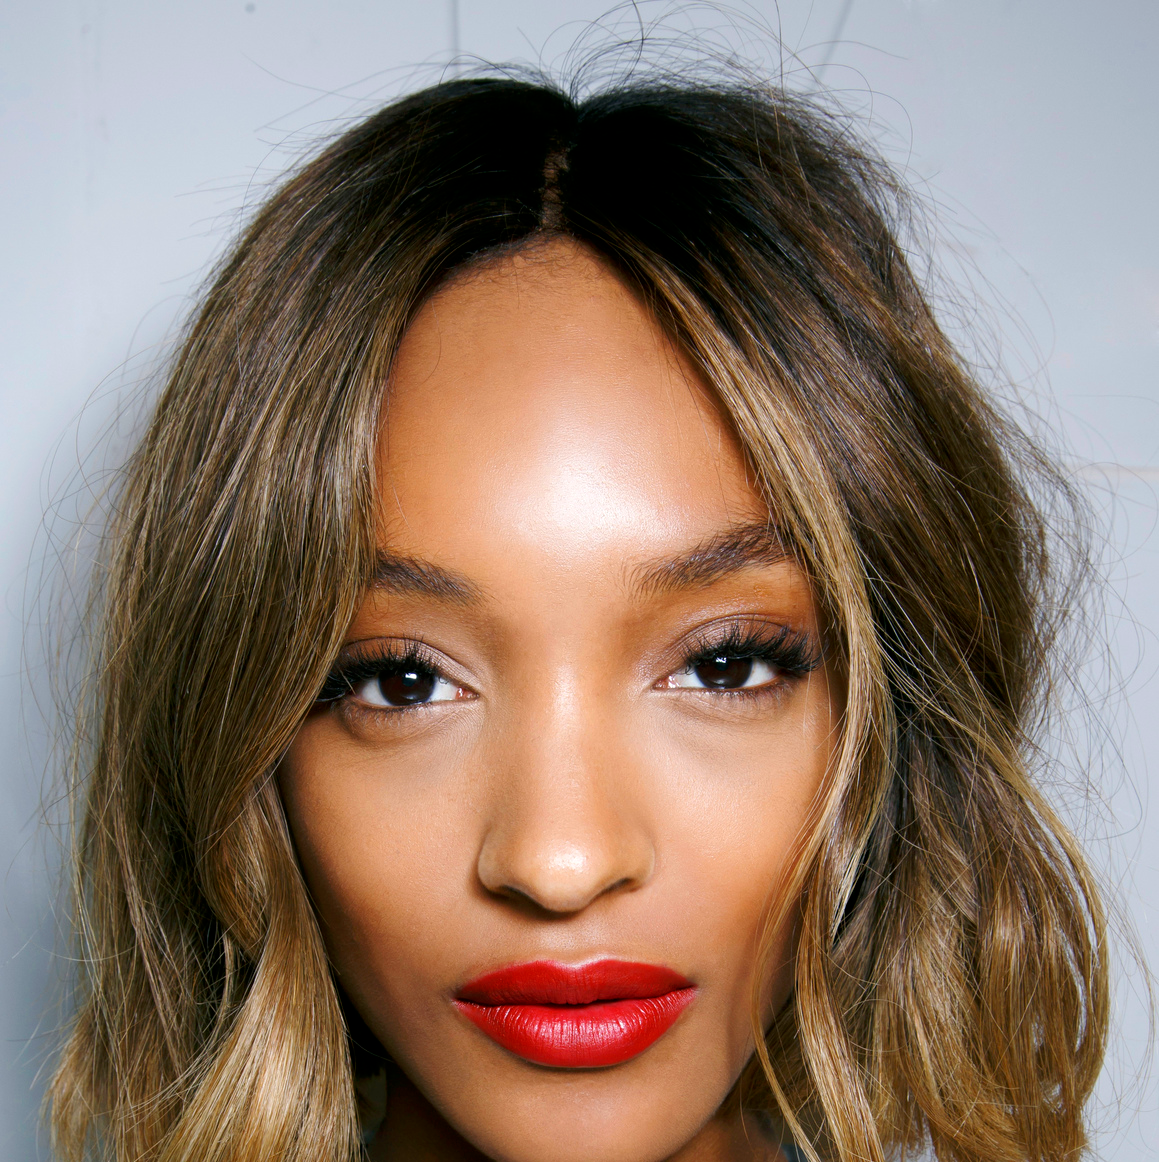 How to Get Beach Waves on Short Hair: The 8 Easiest Tutorials